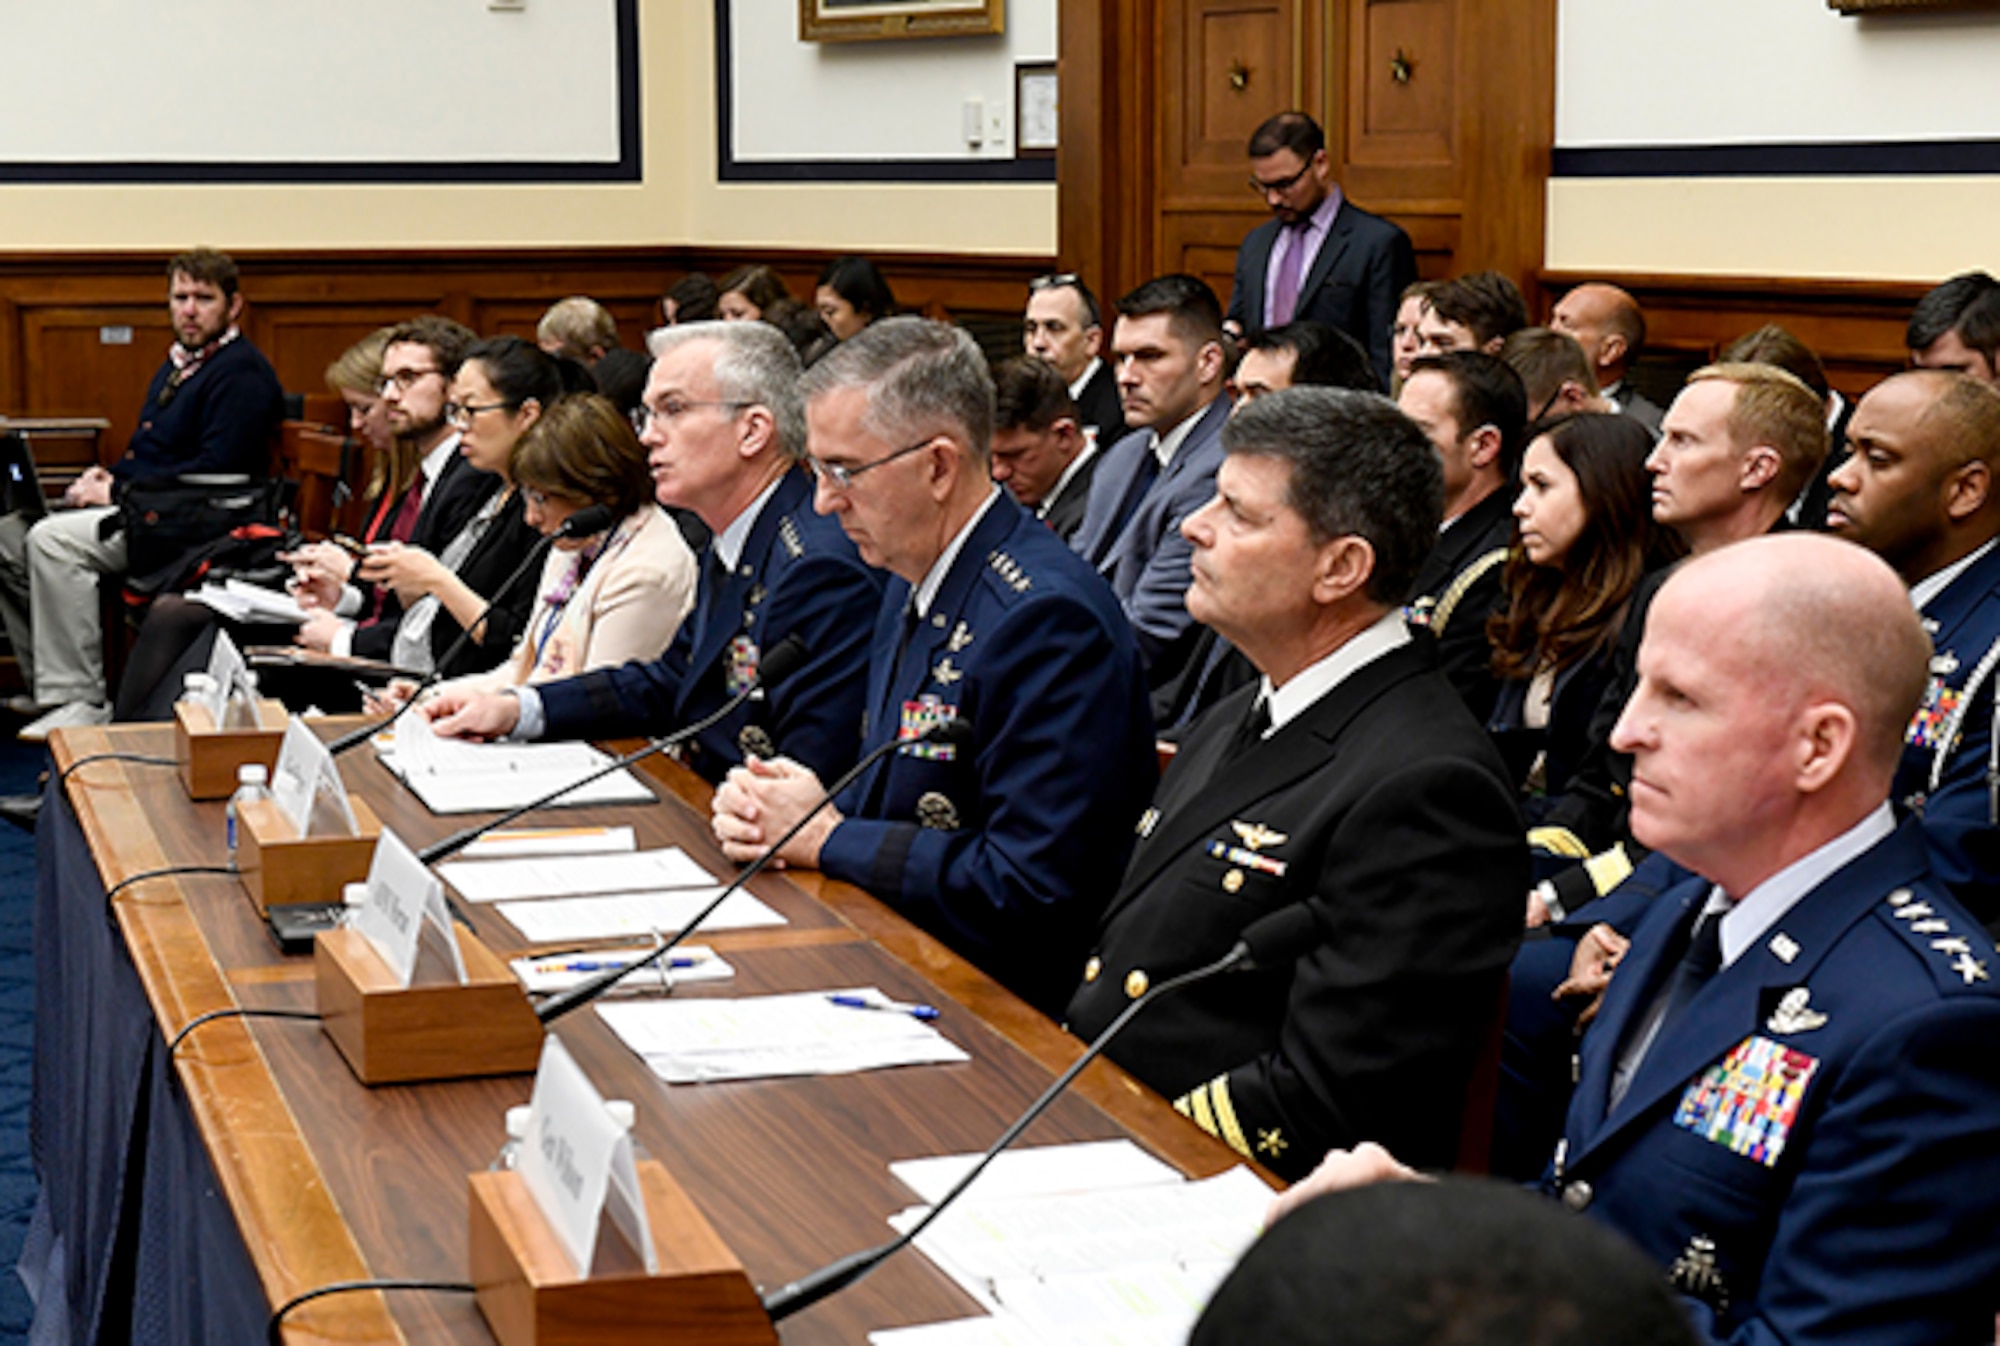 Air Force Vice Chief of Staff Gen. Stephen Wilson, right, testifies before the House Armed Services Committee about nuclear deterrence in Washington, D.C., March 8, 2017.  With Wilson were Vice Chairman, Joint Chiefs of Staff Gen. Paul Selva; U.S. Strategic Command commander, Gen. John Hyten; and Vice Chief of Naval Operations Adm. Bill Moran.  (U.S. Air Force photo/Scott M. Ash)